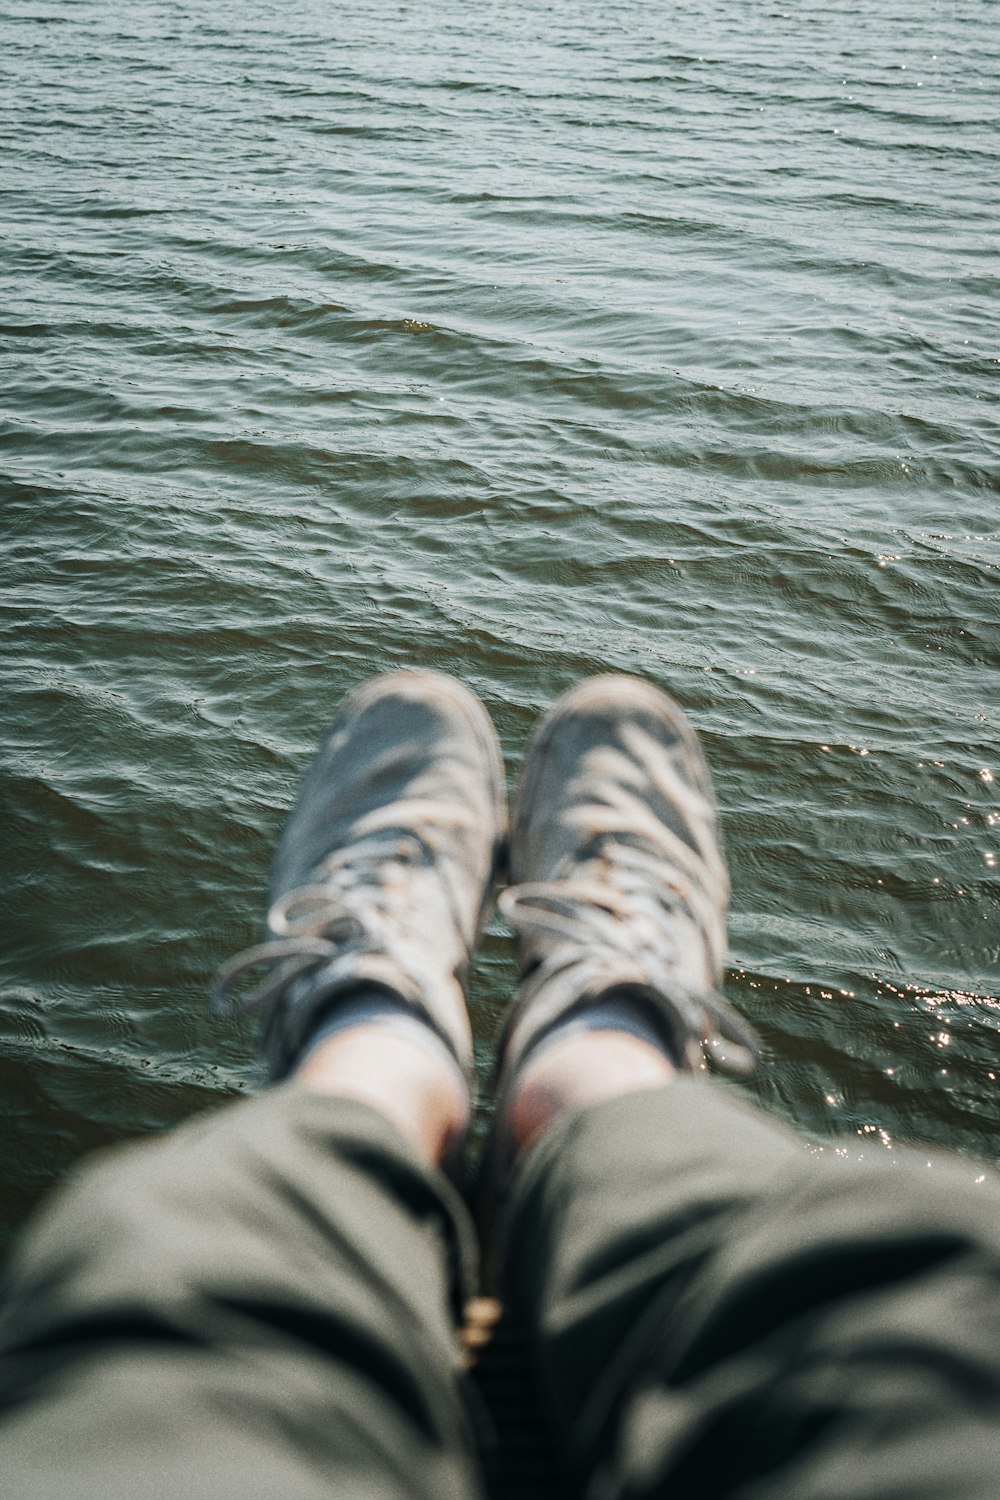 a person's feet in the water with a boat in the background